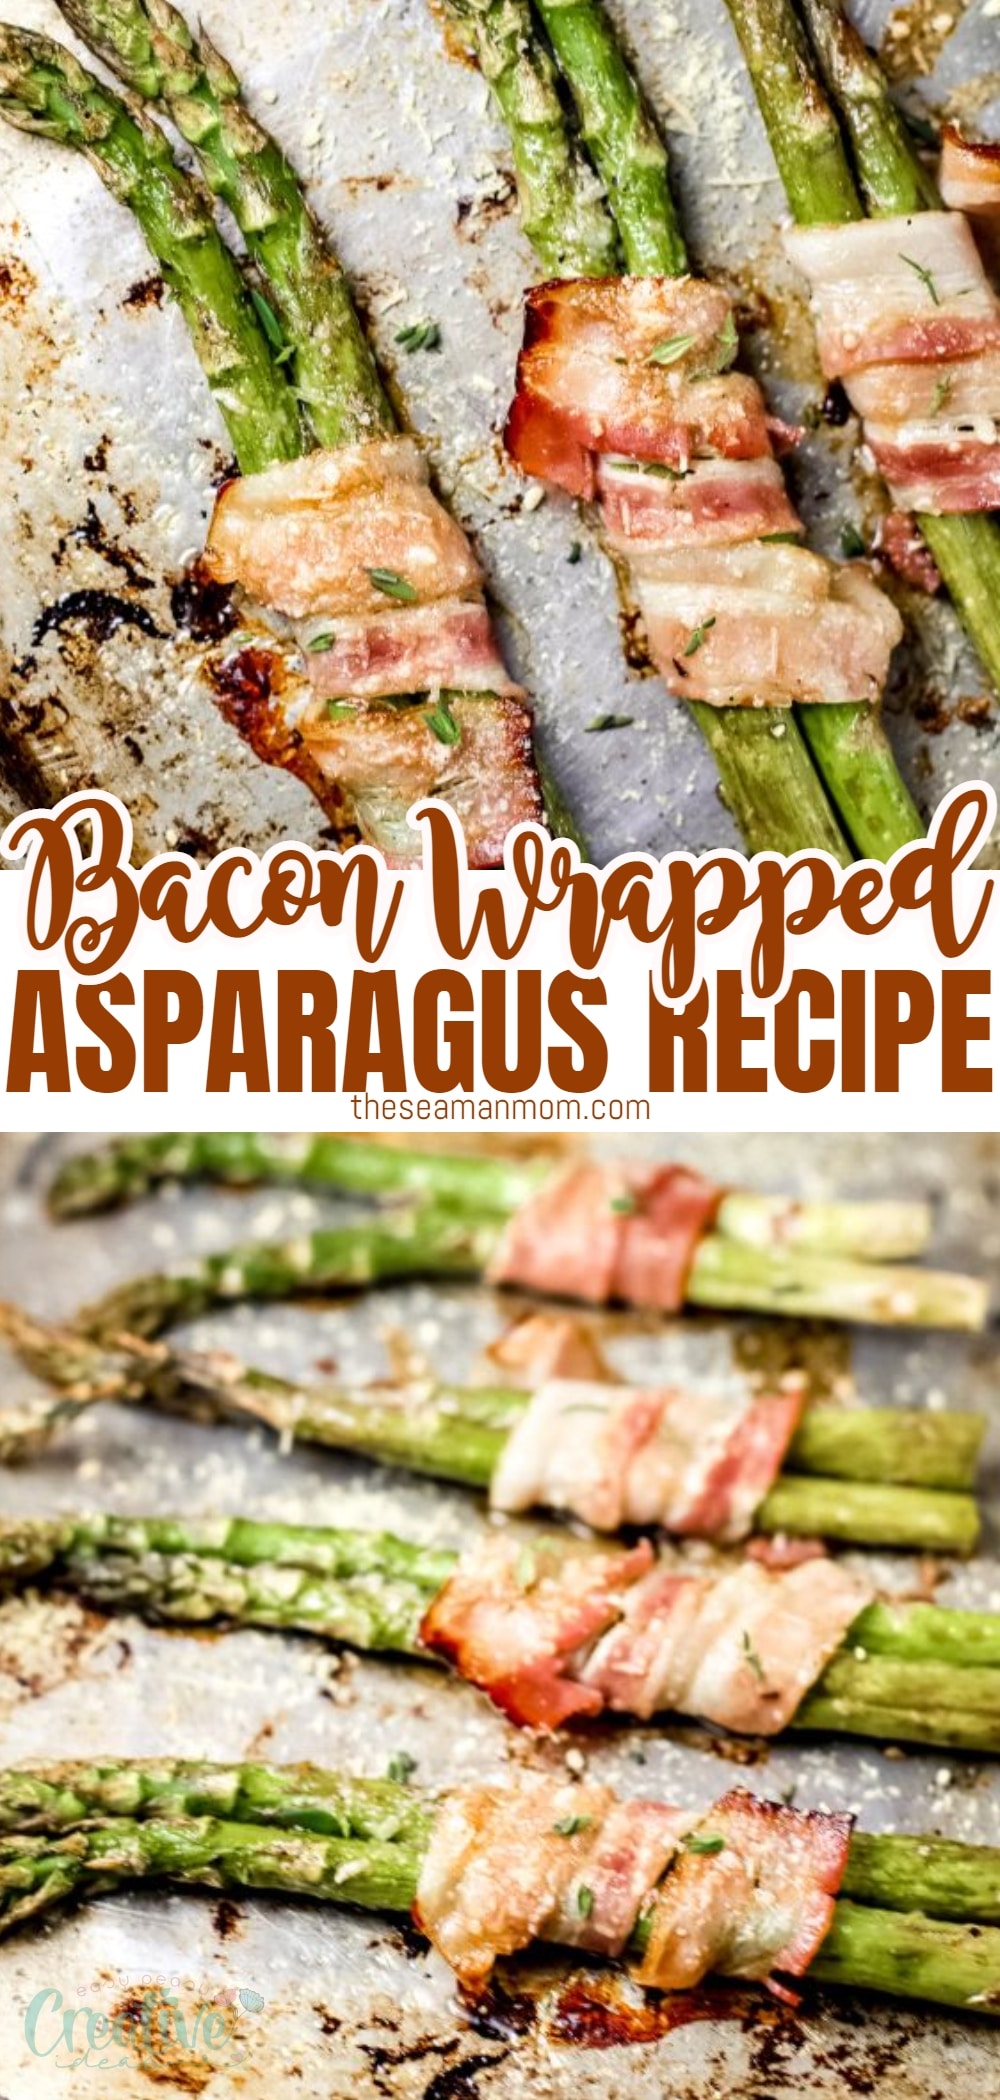 This bacon wrapped asparagus recipe is a super easy, yet totally elegant and impressive, side dish! Packed with flavor and just a bit crunchy you can be sure this baked bacon wrapped asparagus is going to become a staple recipe in your home! via @petroneagu